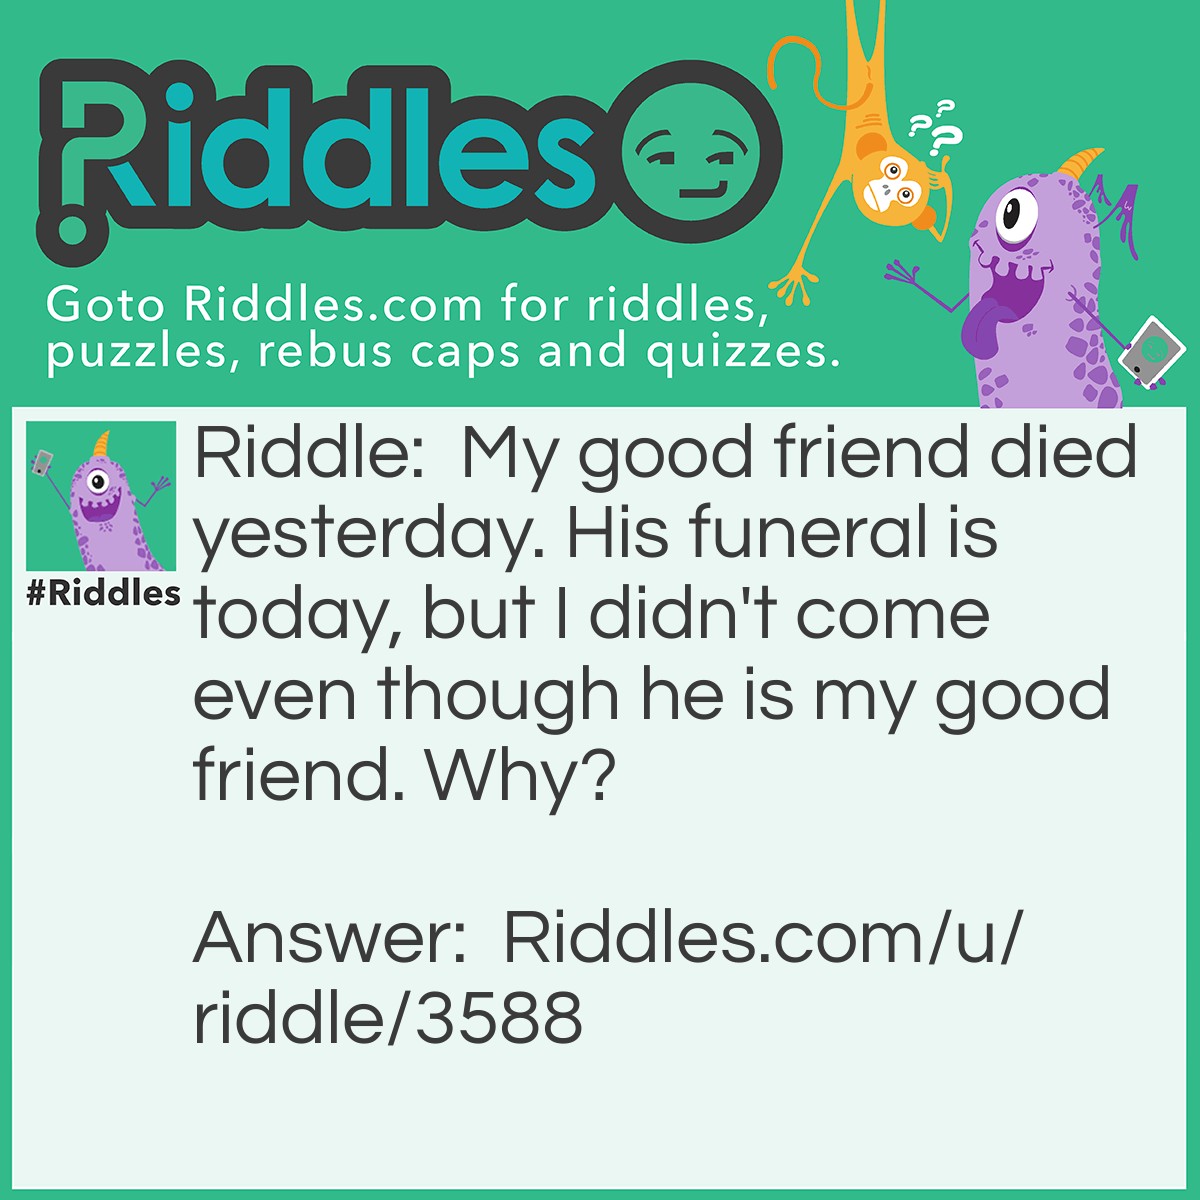 Riddle: My good friend died yesterday. His funeral is today, but I didn't come even though he is my good friend. Why? Answer: I am in jail for killing the guy who killed my friend.